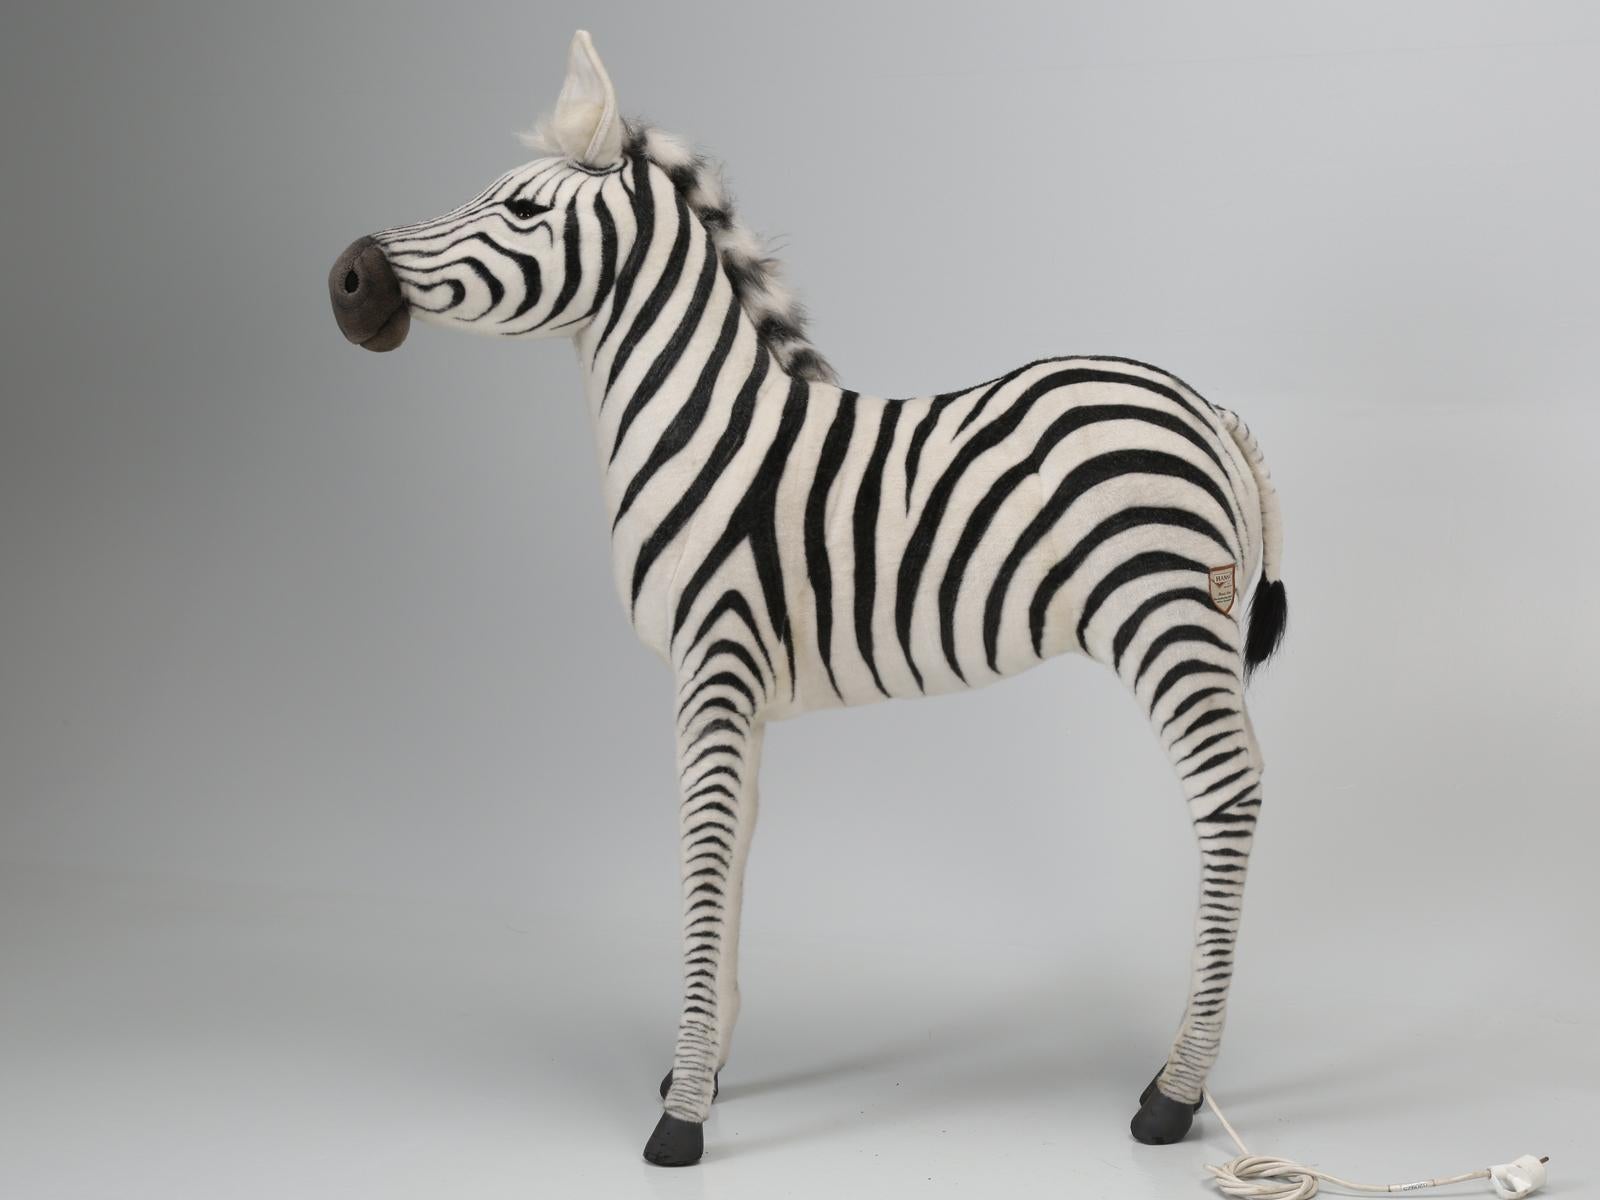 The famous stuffed animal company, Hansa, was created in 1972 by German-born Hans Axthelm. Each and every Hansa stuffed animal, is hand sewn, using the inside-out method, in order to avoid visible seams. This particular animated or mechanical Zebra